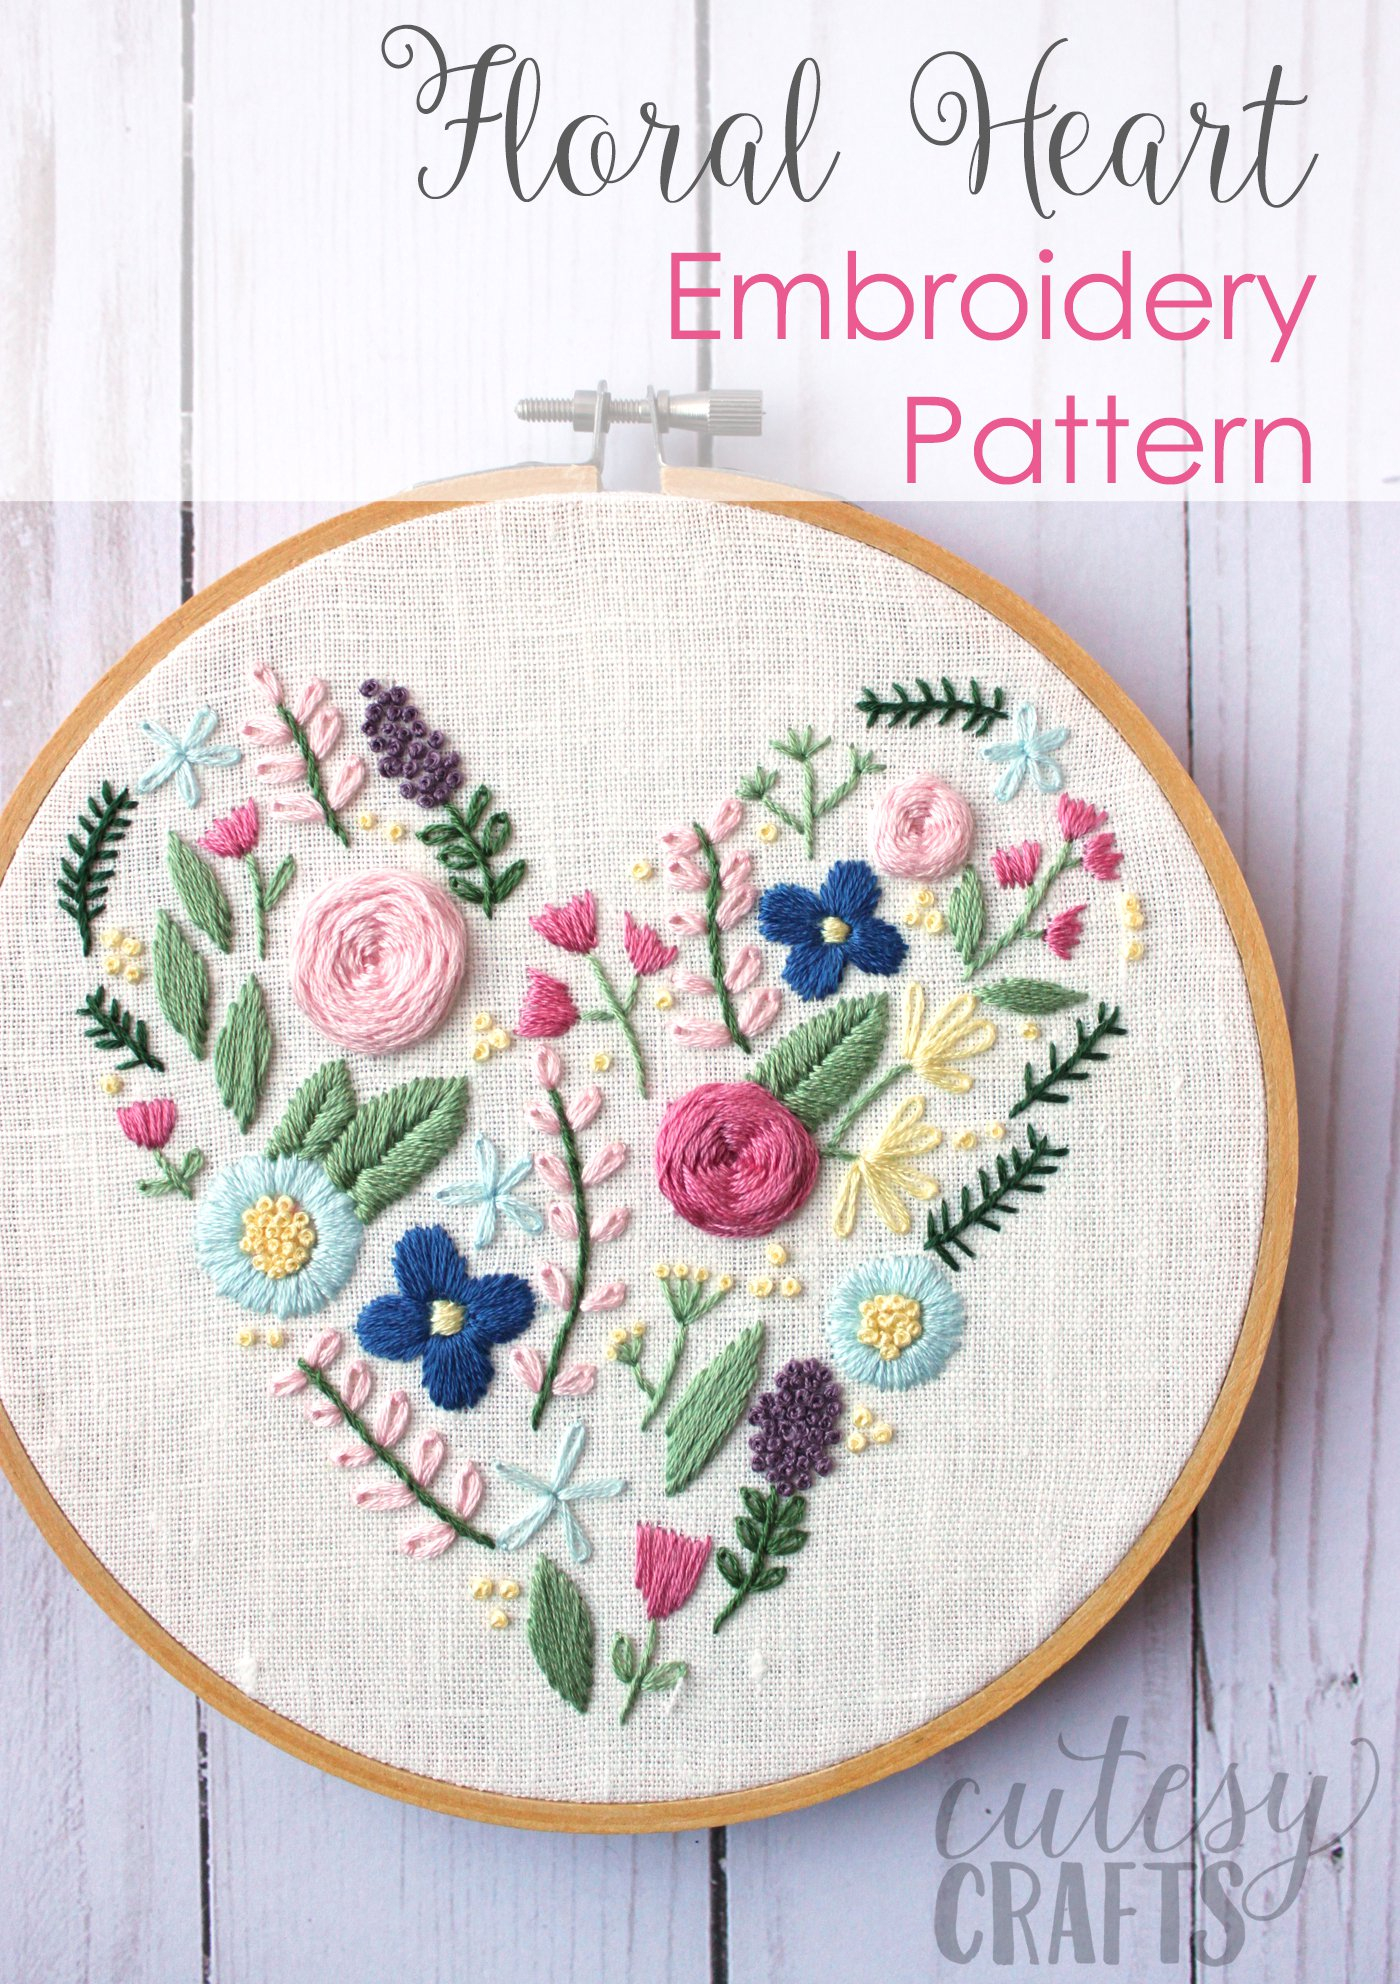 Machine Embroidery Patterns Free Download Floral Heart Hand Embroidery Pattern The Polka Dot Chair